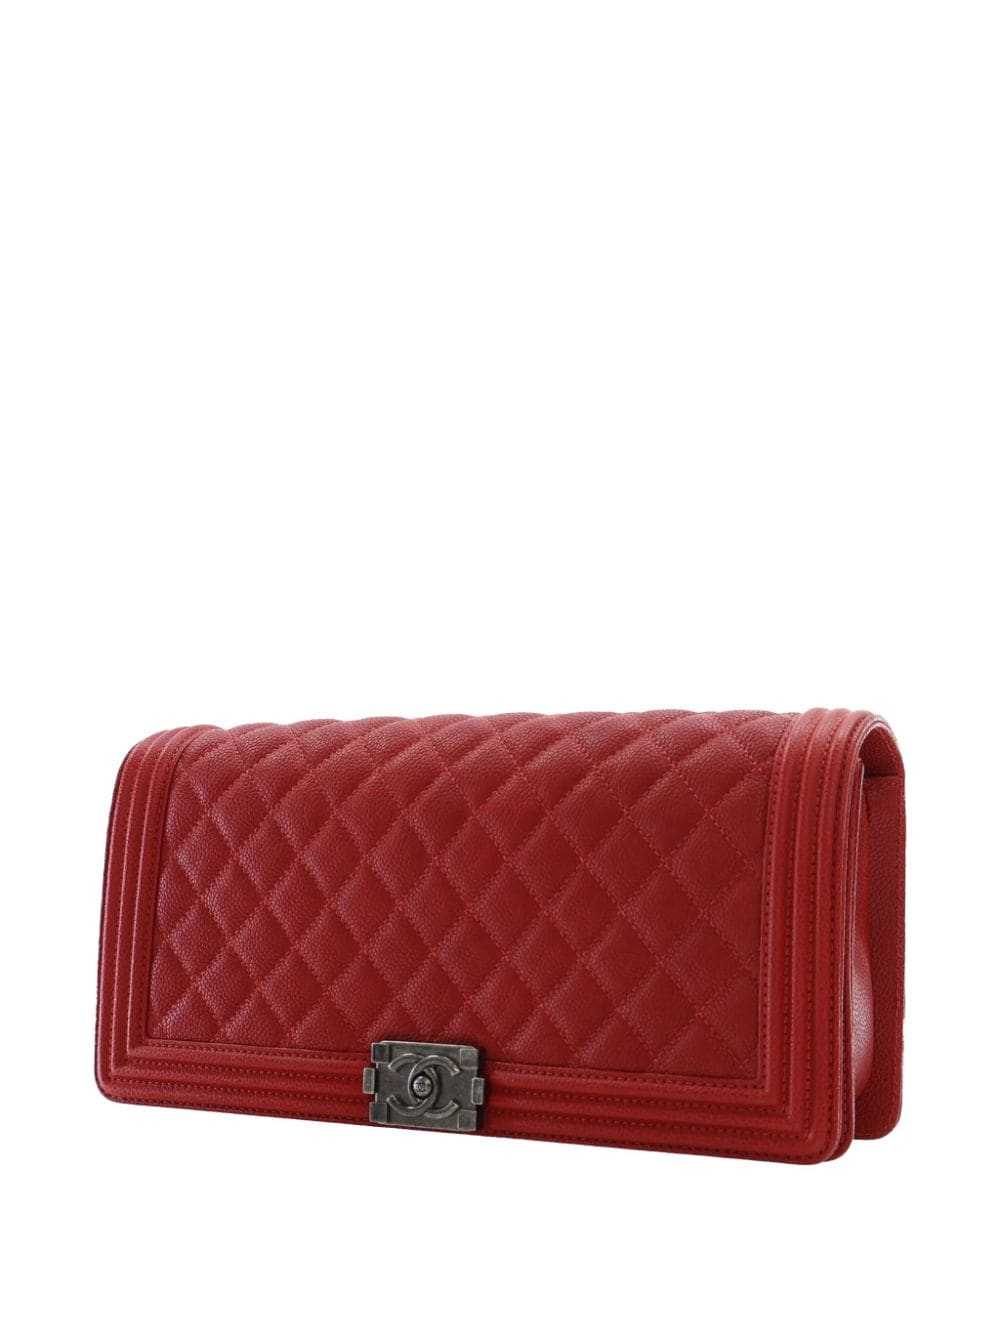 CHANEL Pre-Owned 2016-2017 Quilted Caviar Boy clu… - image 3